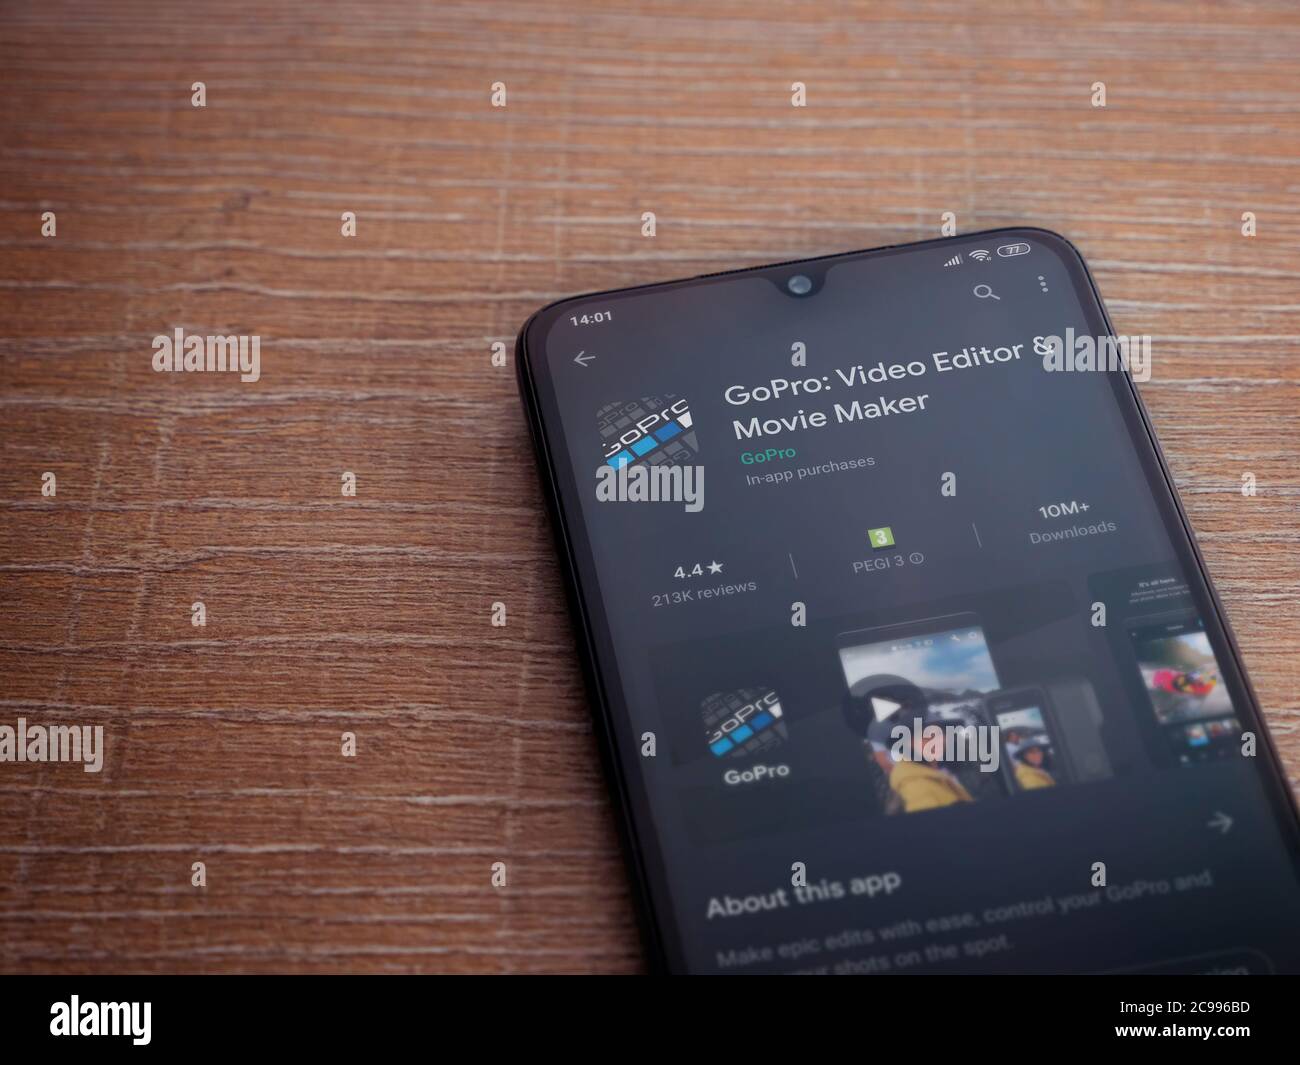 Lod, Israel - July 8, 2020: GoPro - Video Editor and Movie Maker app play  store page on the display of a black mobile smartphone on wooden background  Stock Photo - Alamy